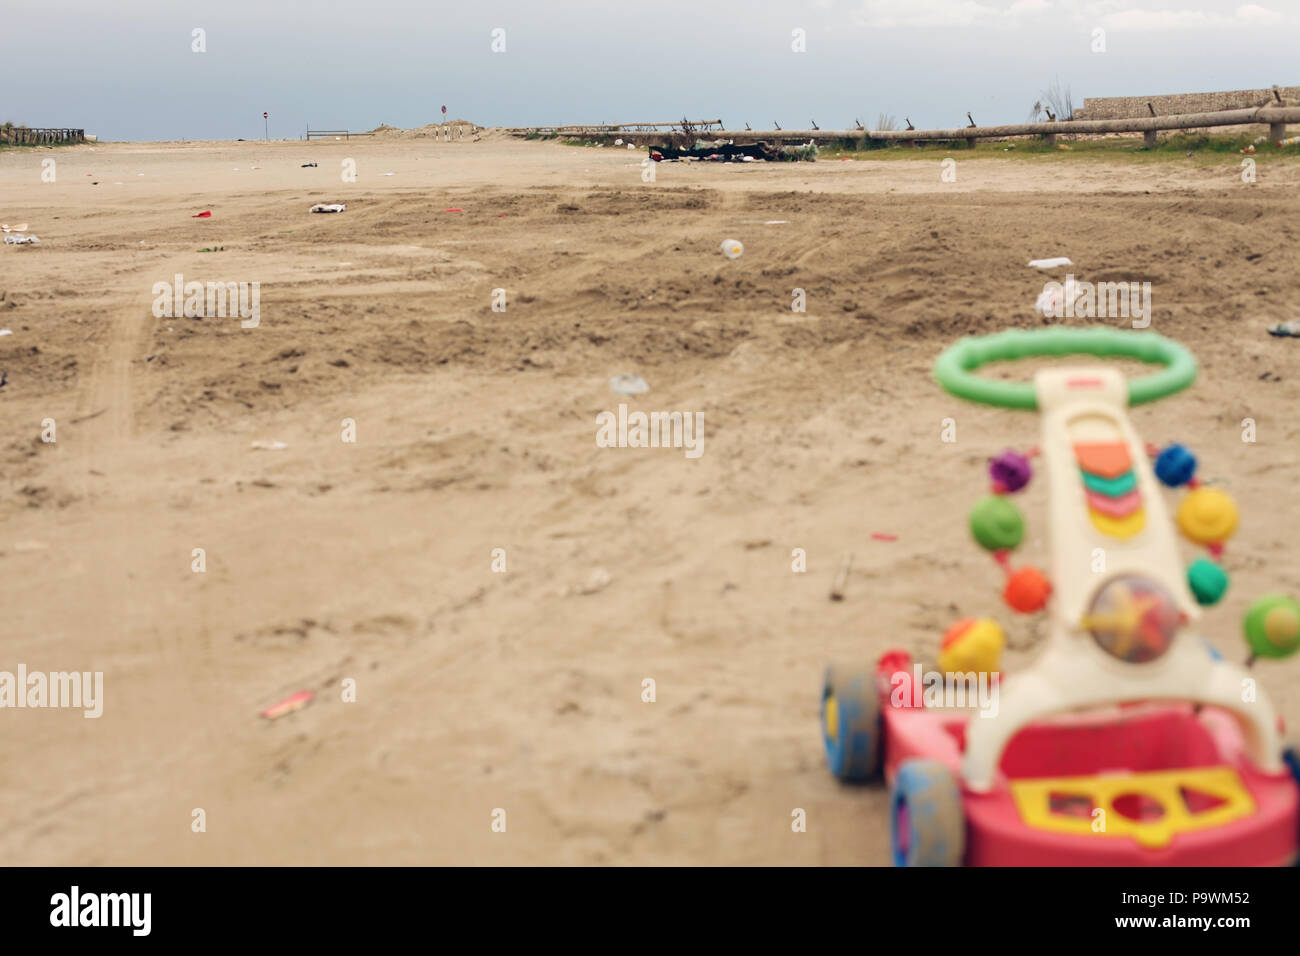 An abandoned old plastic toy on a sandy beach full of garbage and dirt. Copy space shot. Desolation, sadness, memories. Stock Photo